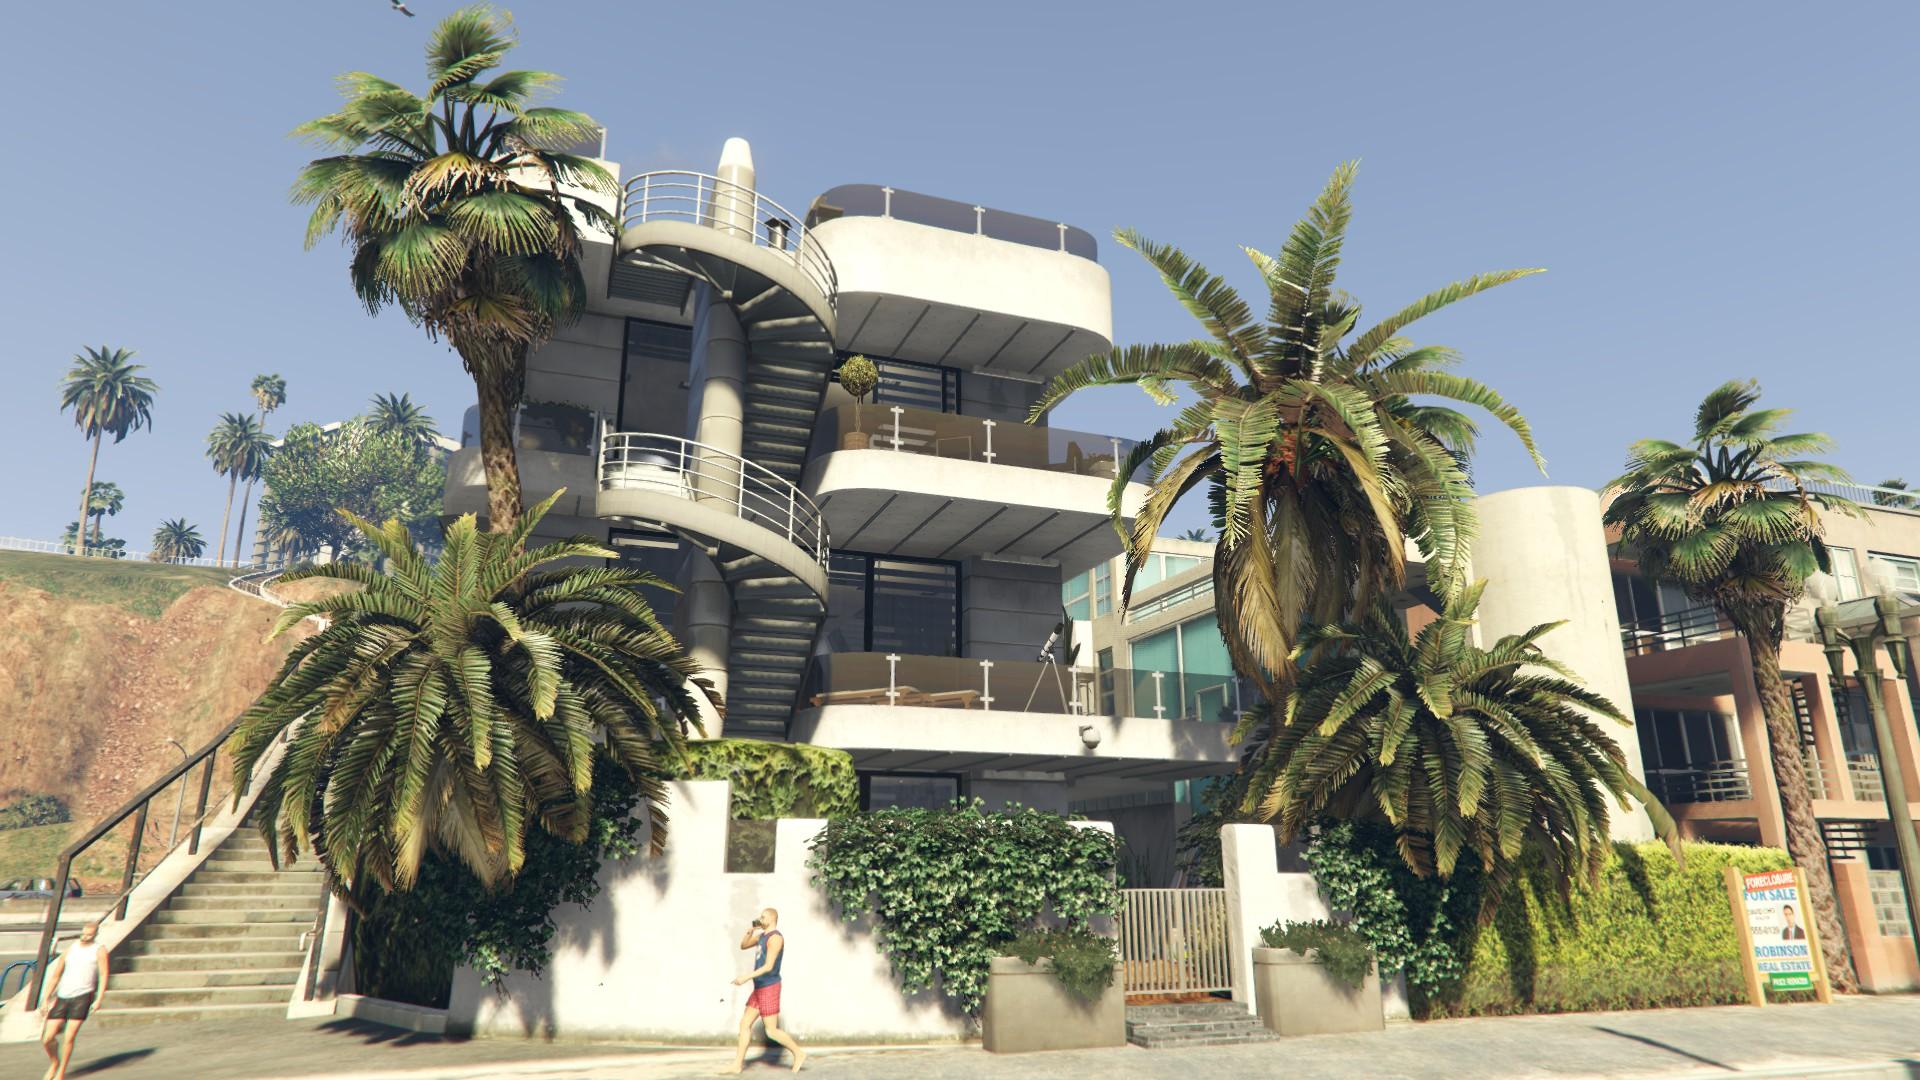 Gta 5 can you buy a house in фото 67